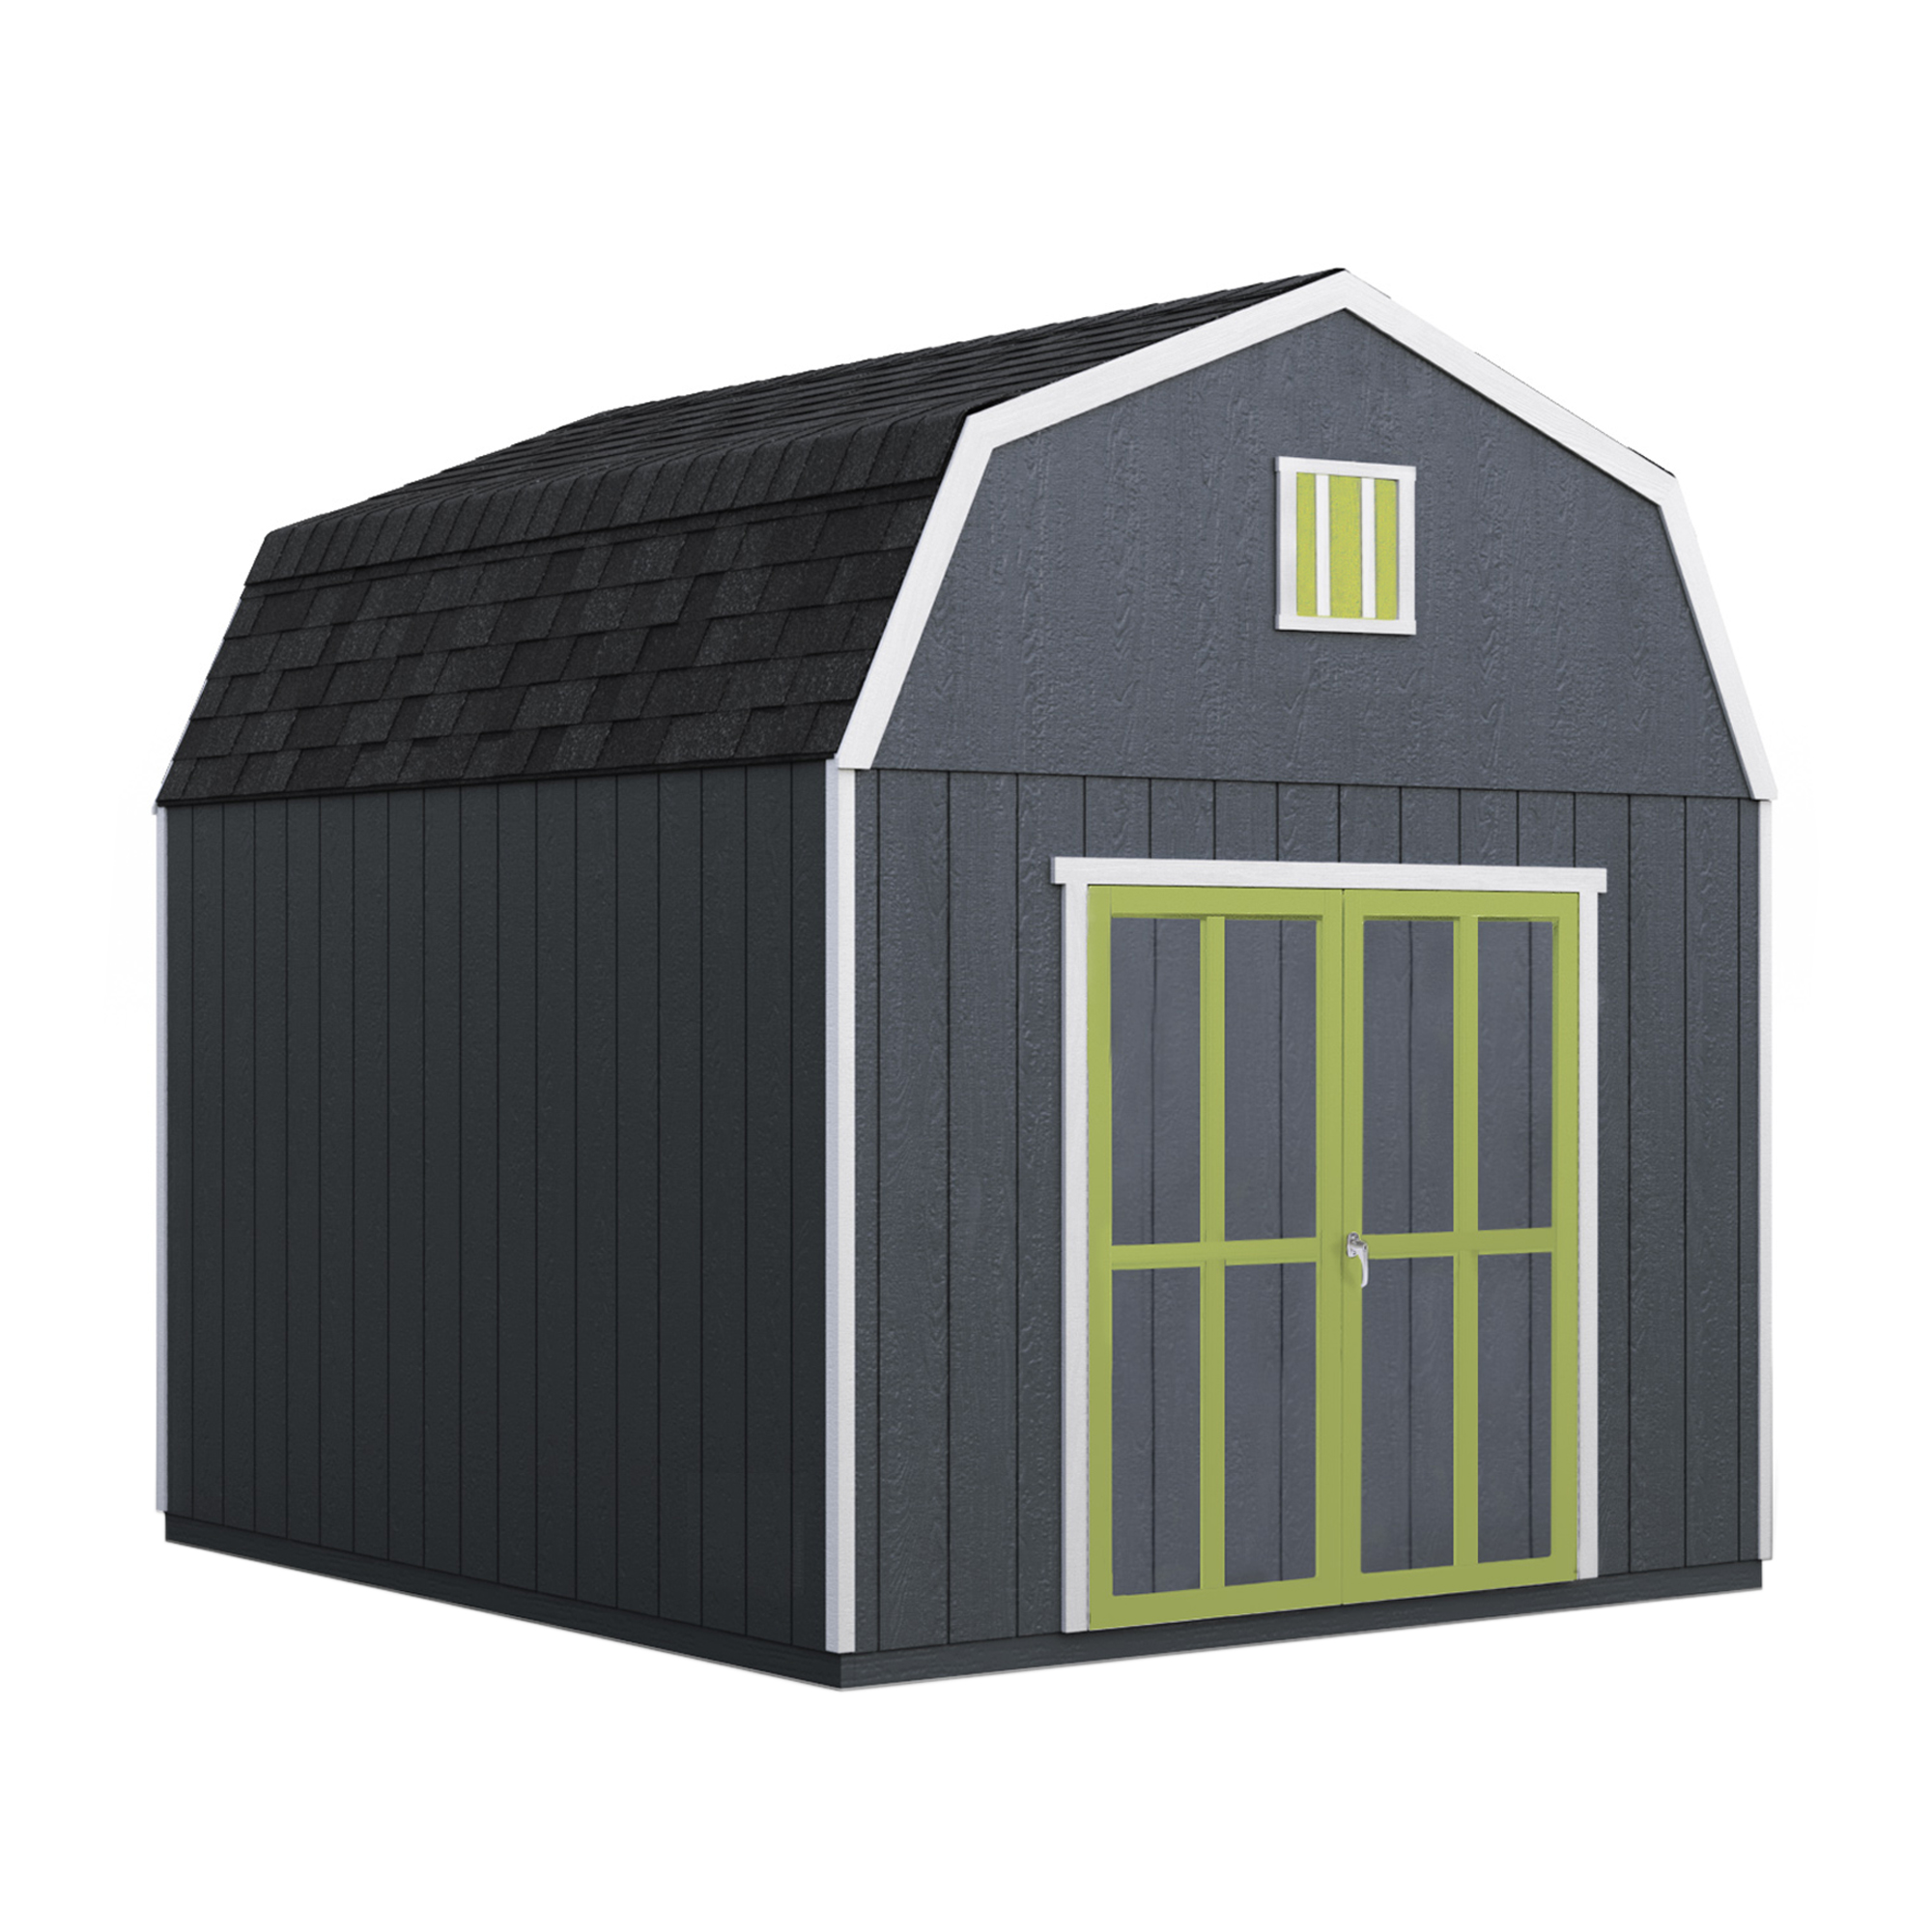 Handy Home Braymore 10x14 Wood Storage Shed Kit (19454-2)